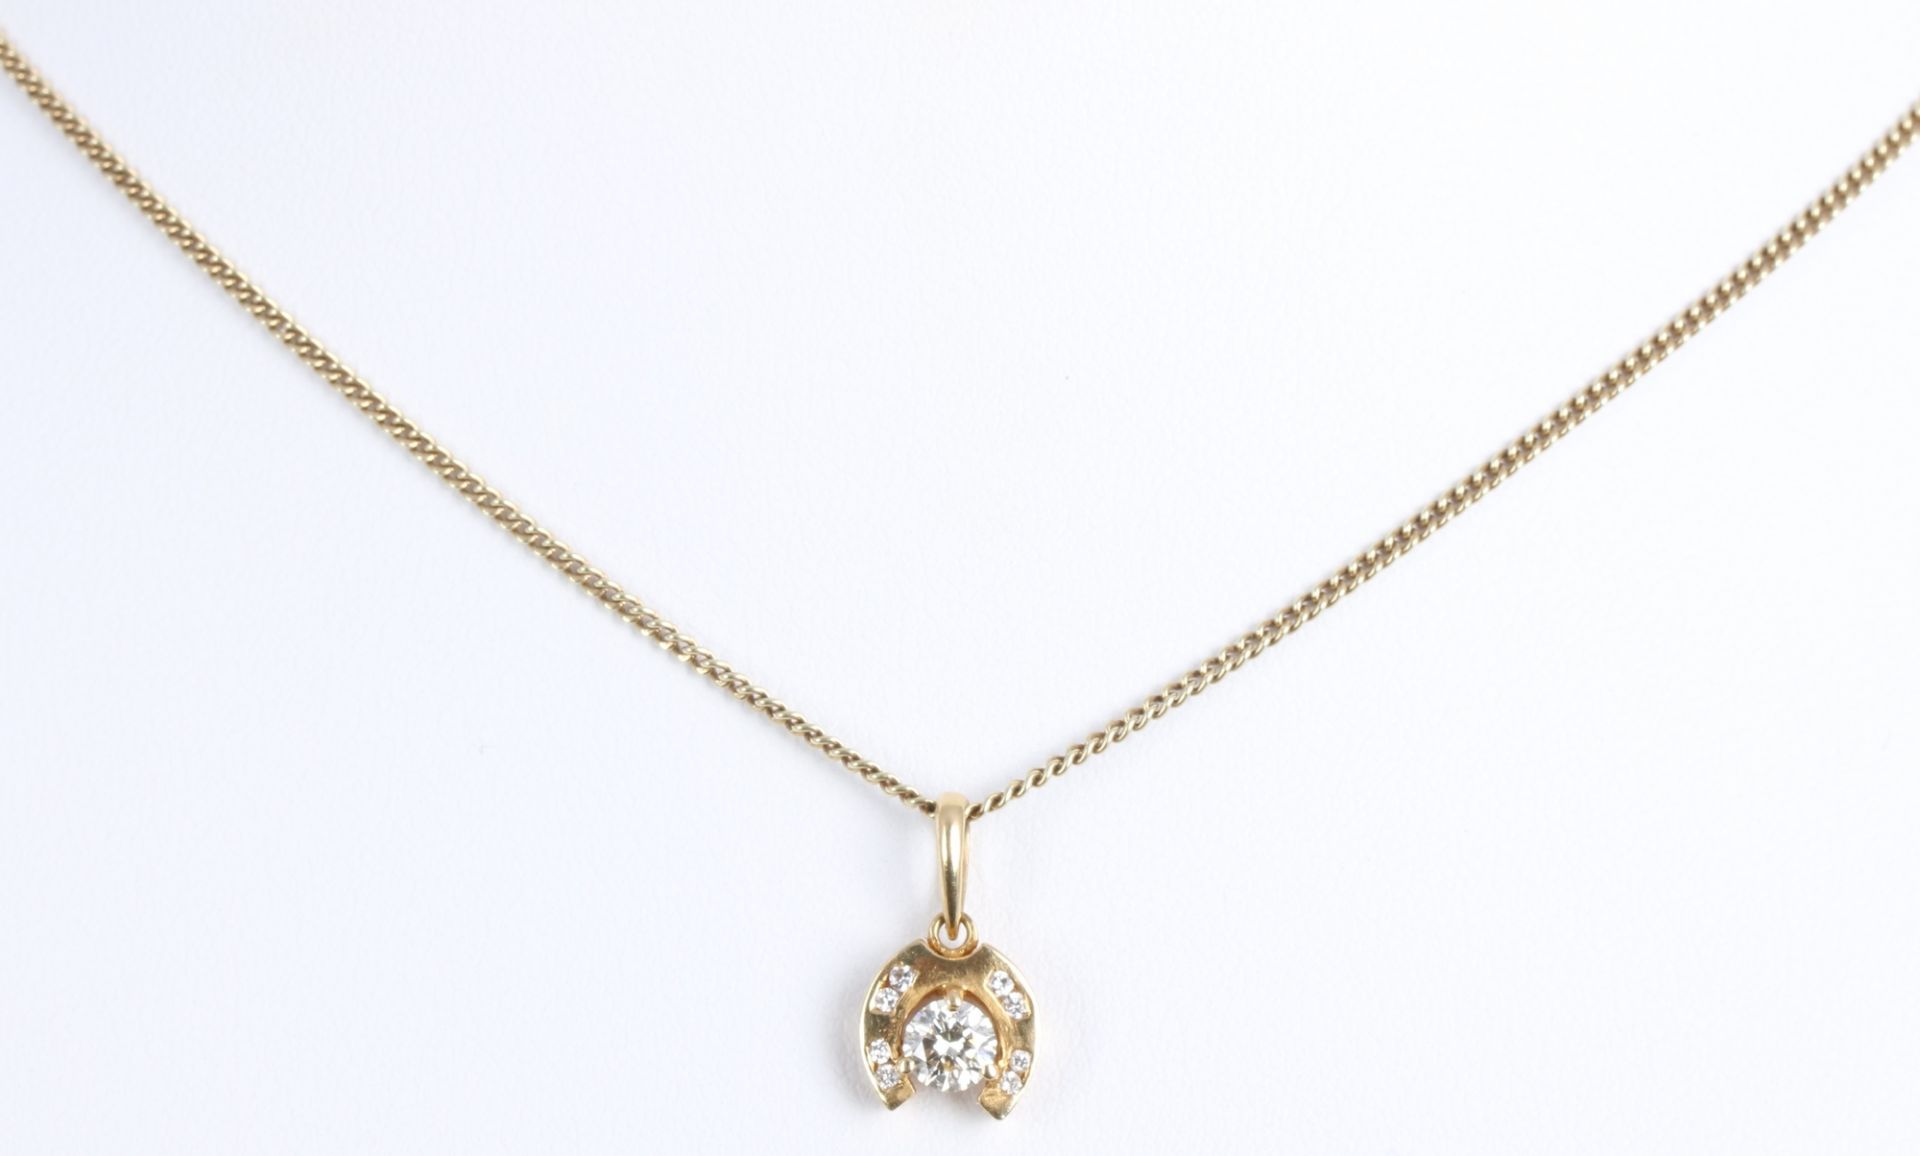 750 Gold Hufeisenanhänger Brillant 0.25ct an 585 Gold Kette, 18K diamond pendant with 14K necklace, - Image 2 of 5